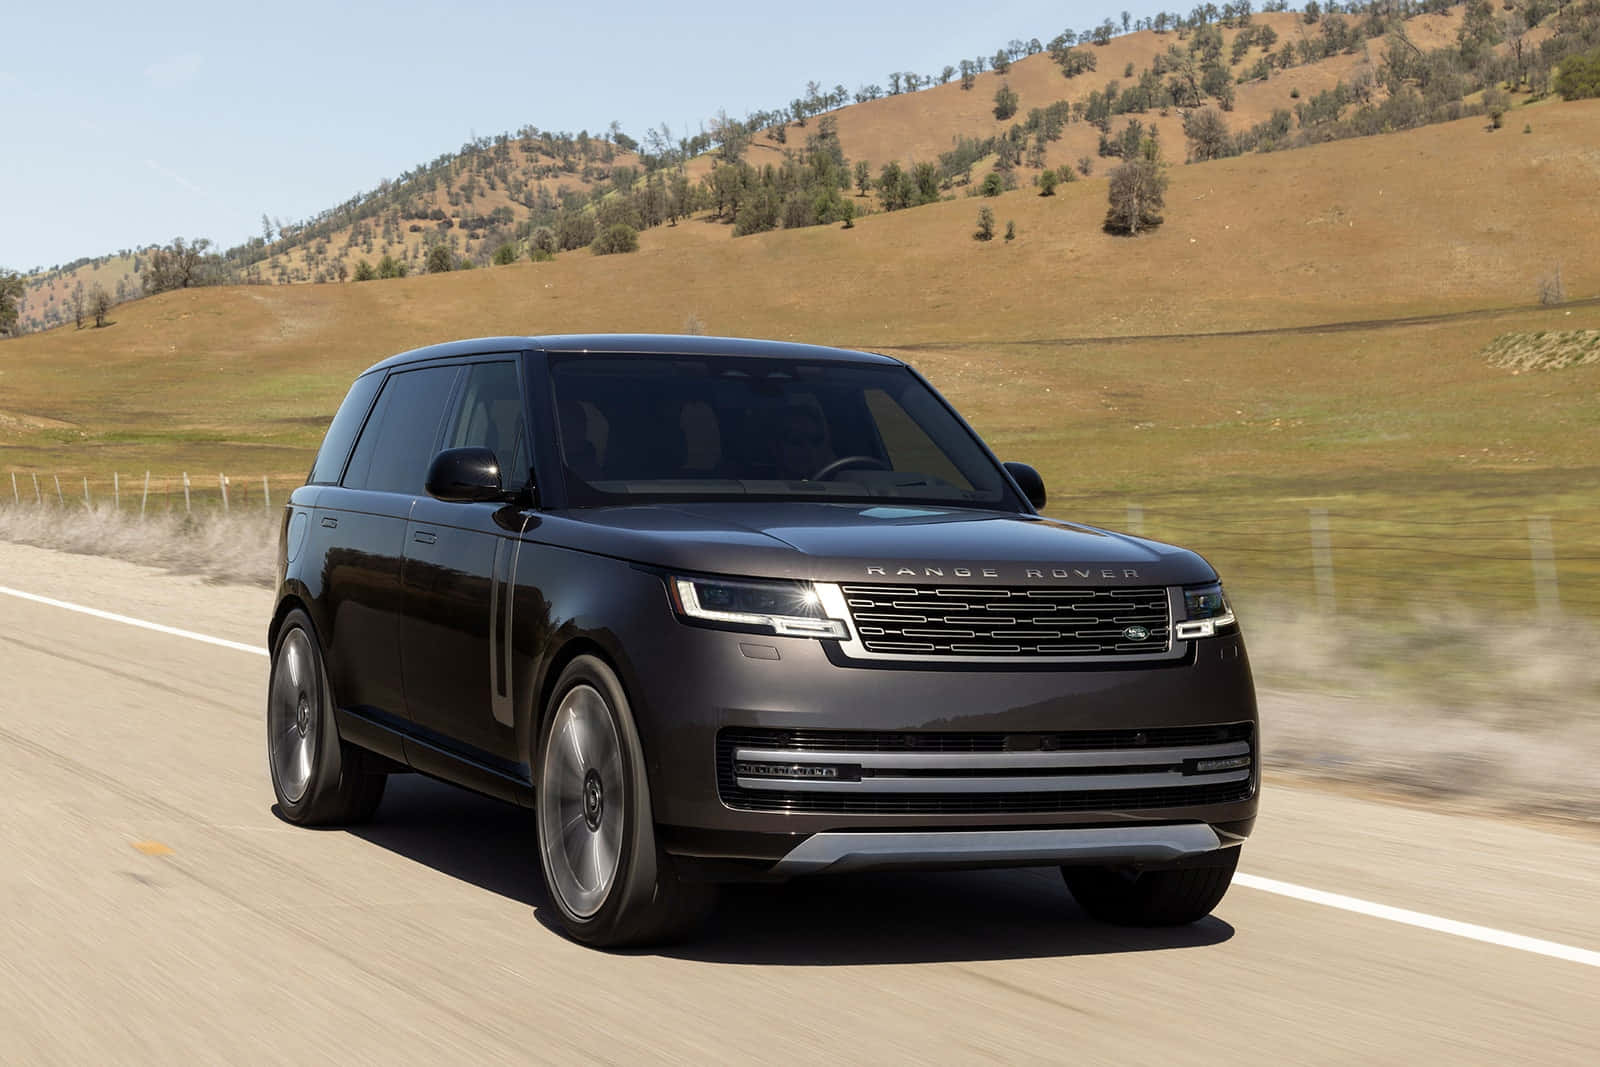 The New Range Rover Vogue Is Driving Down The Road